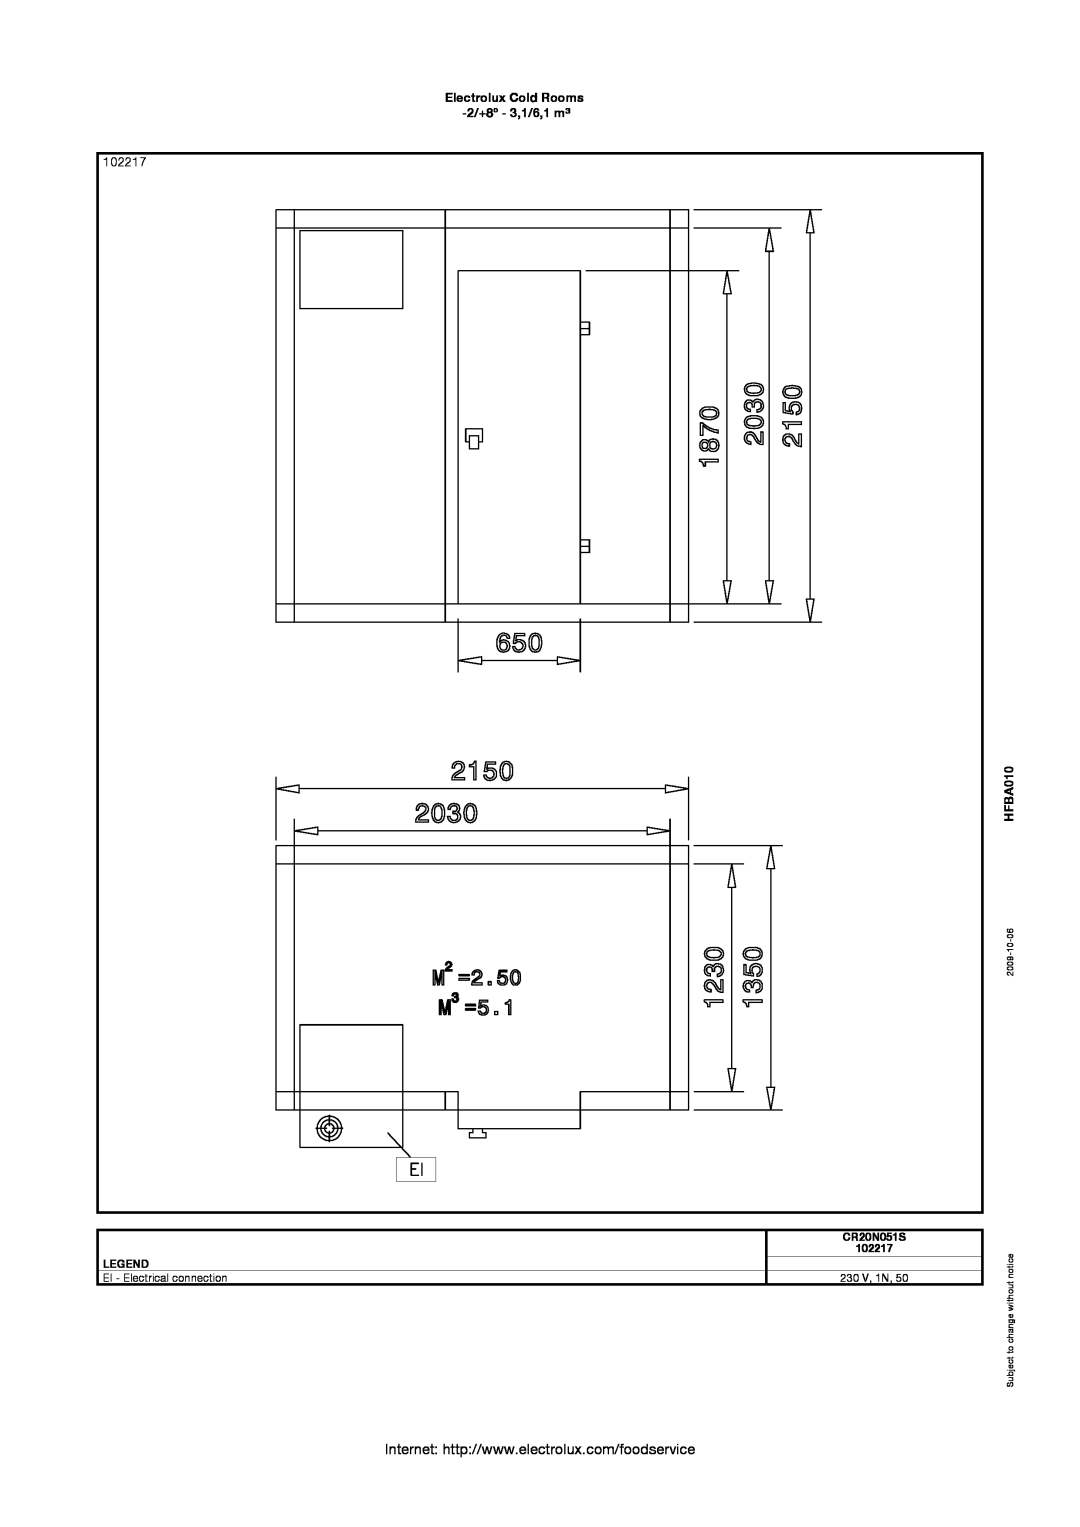 Electrolux 102213 manual 102217, Electrolux Cold Rooms -2/+8º - 3,1/6,1 m³, HFBA010, CR20N051S, EI - Electrical connection 